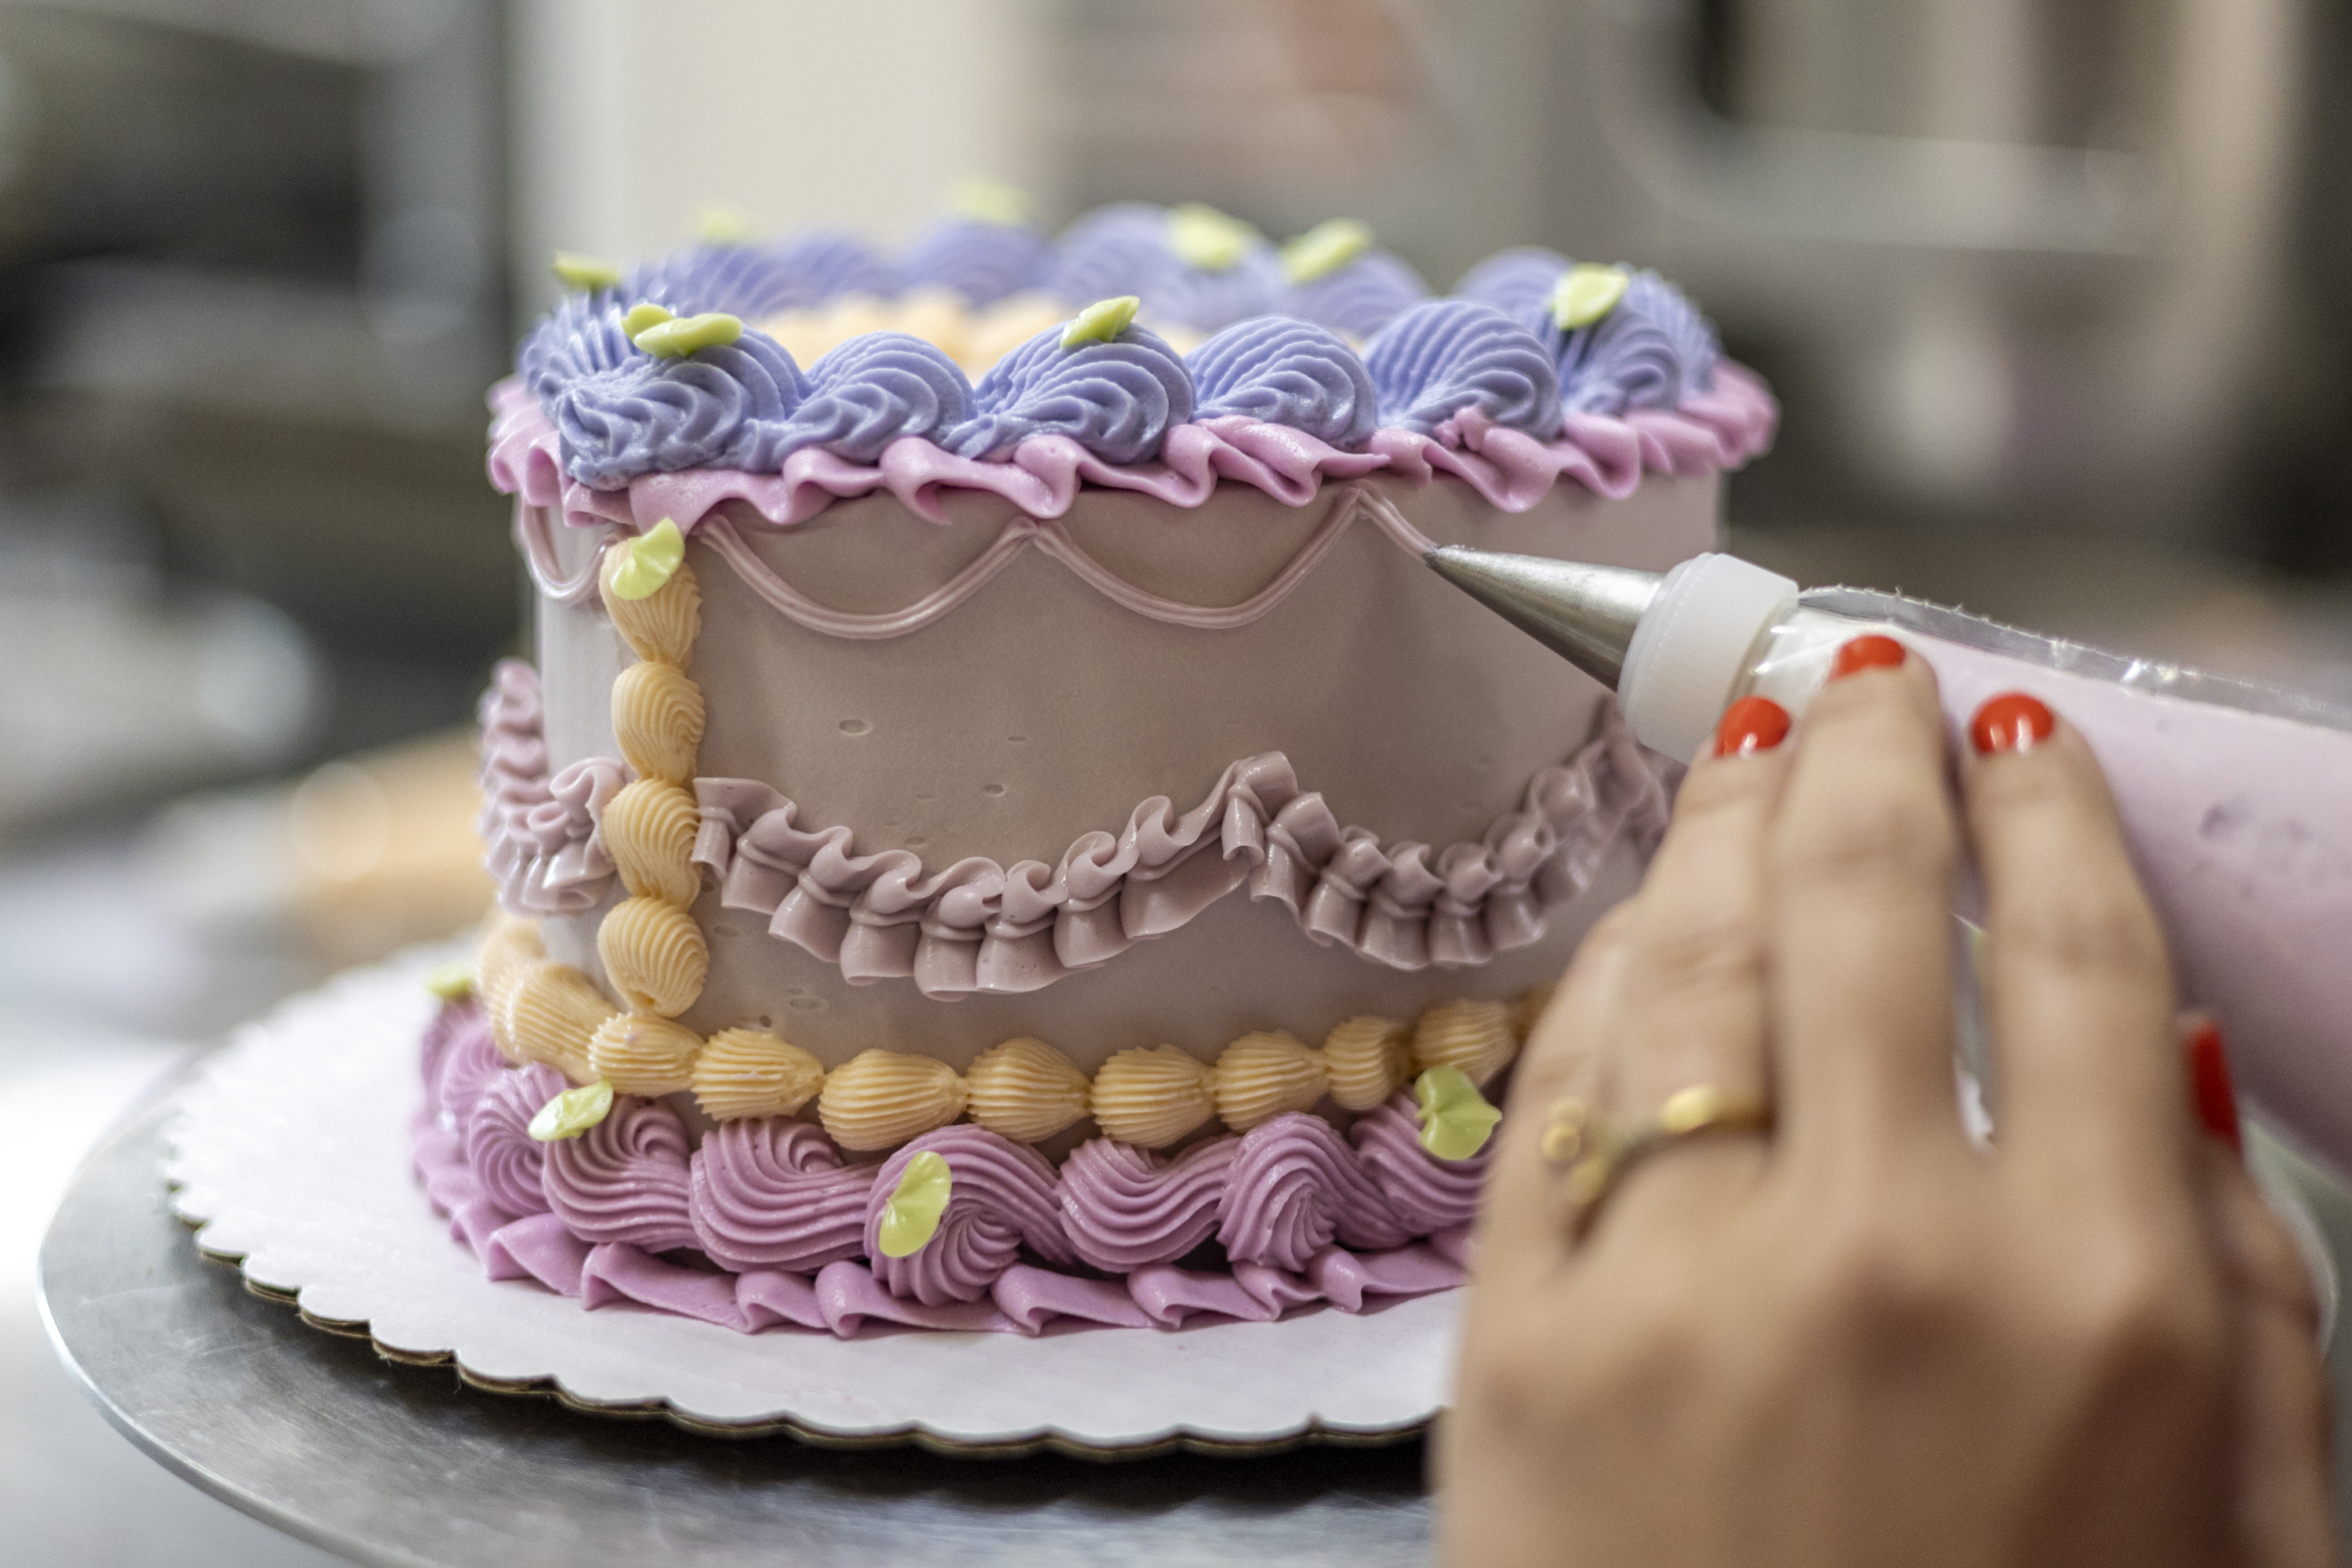 Buttercream-frosted cakes in Philly are having a revival